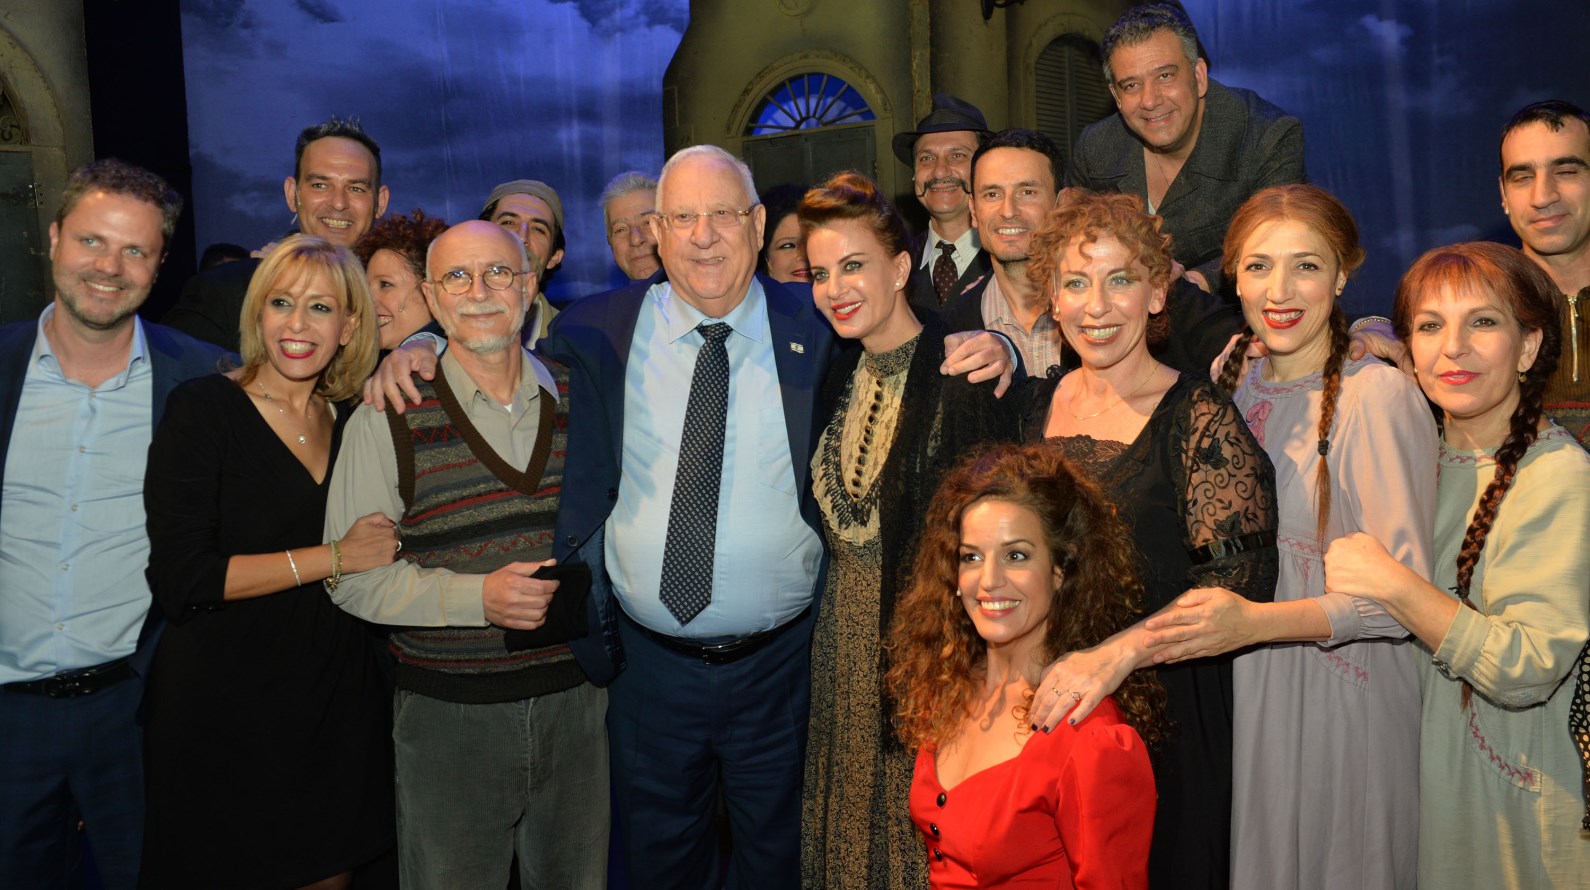 Israeli President Reuven Rivlin with the actors of the play "Spanish Garden" performed at Habima Theatre in Tel Aviv  as part of the Ladino Festival, January 17, 2018. Photo by Kobi Gideon/GPO